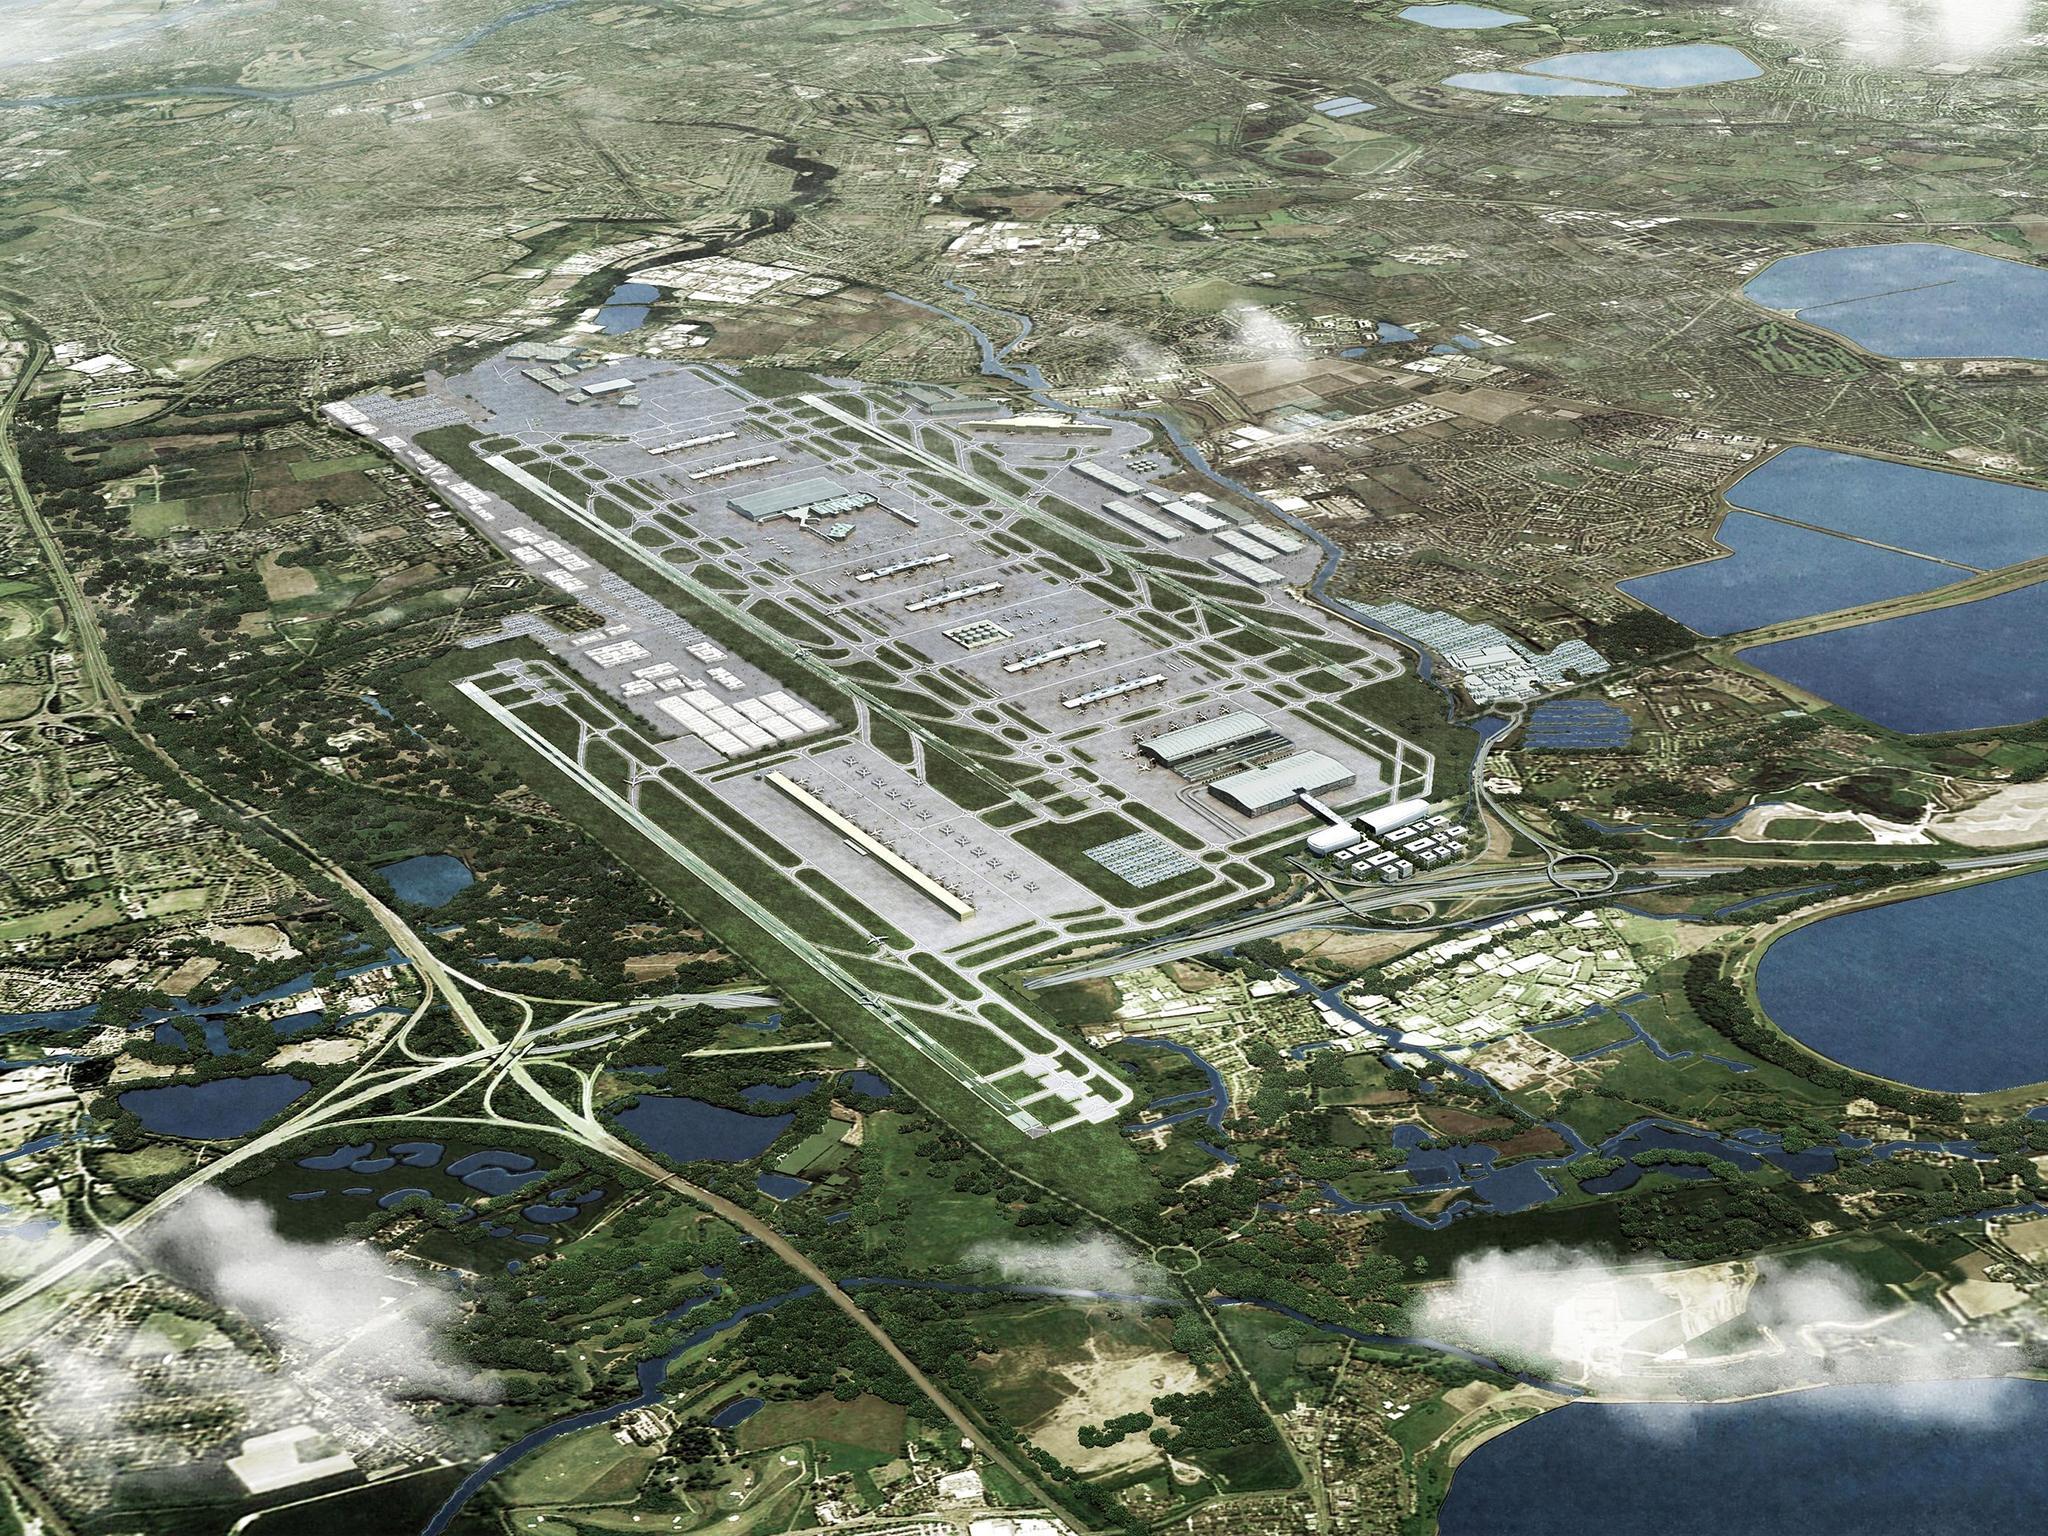 An artist’s impression showing how Heathrow airport could look with a third runway